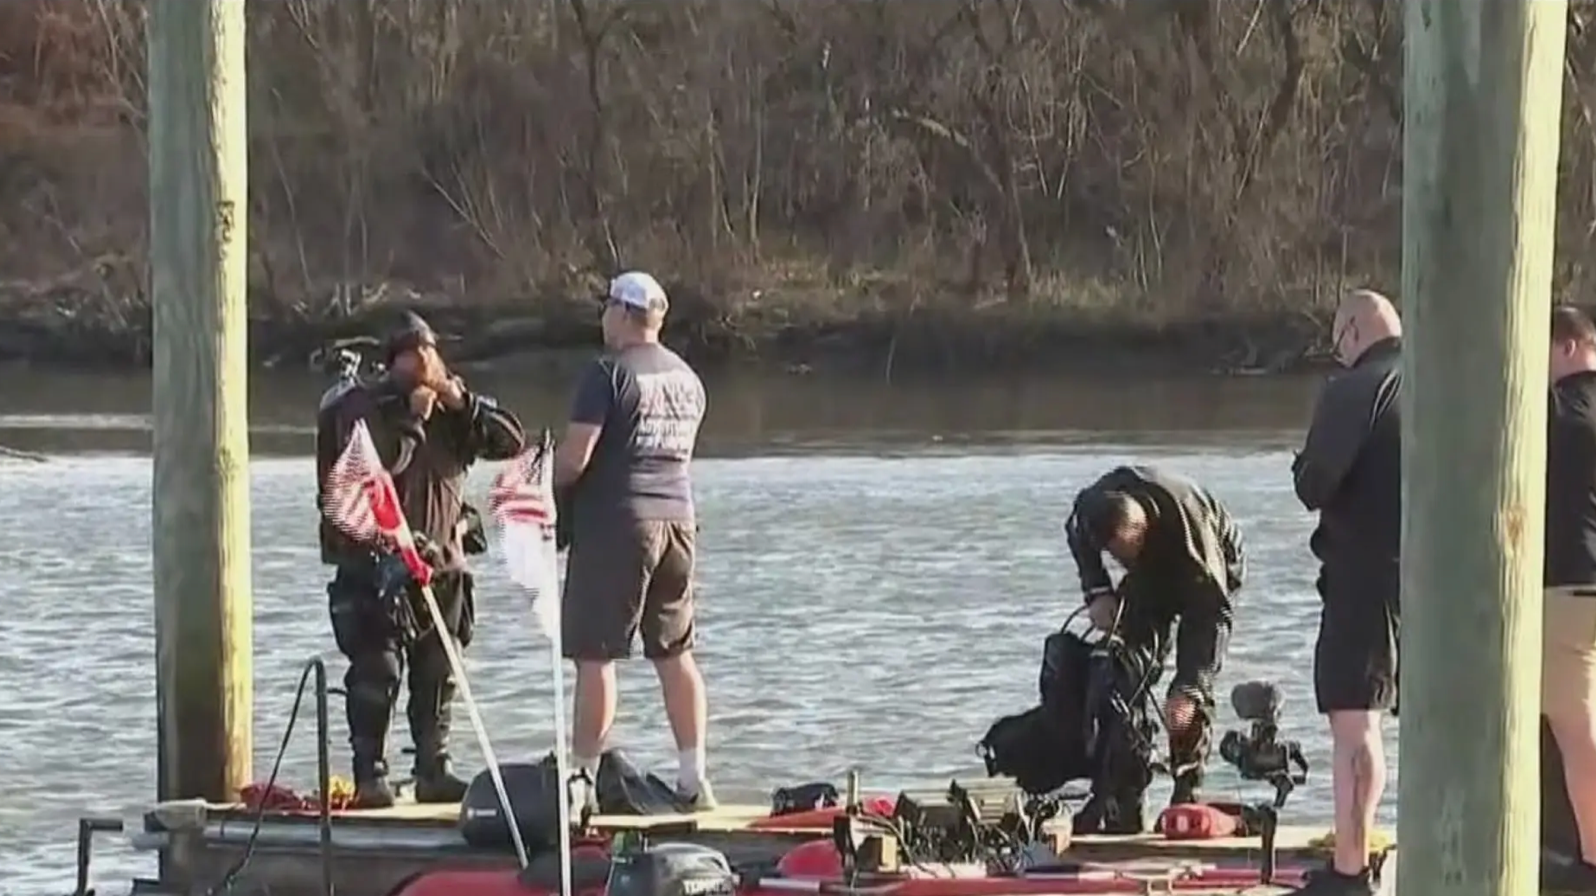 Divers from the Adventures with Purpose YouTube group found missing man James Amabile at Darby’s Creek in Pennsylvania